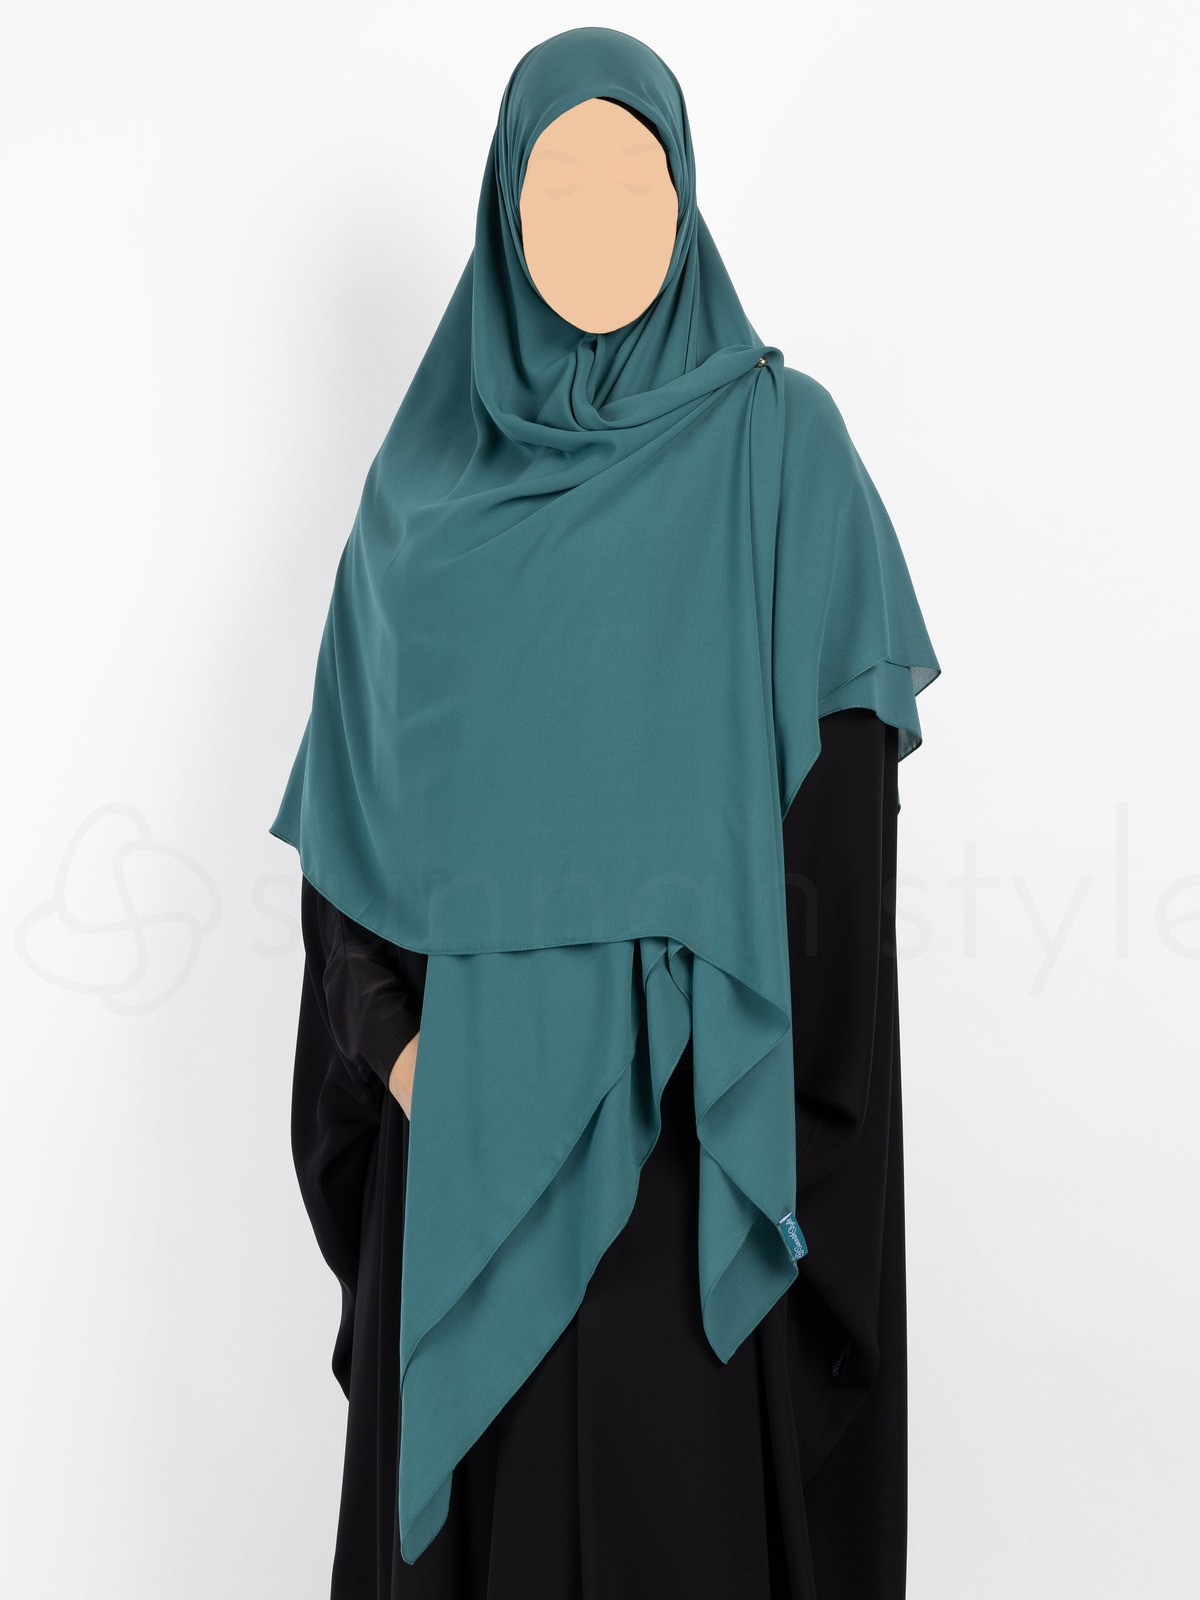 Sunnah Style - Essentials Square Hijab - XL (Teal)